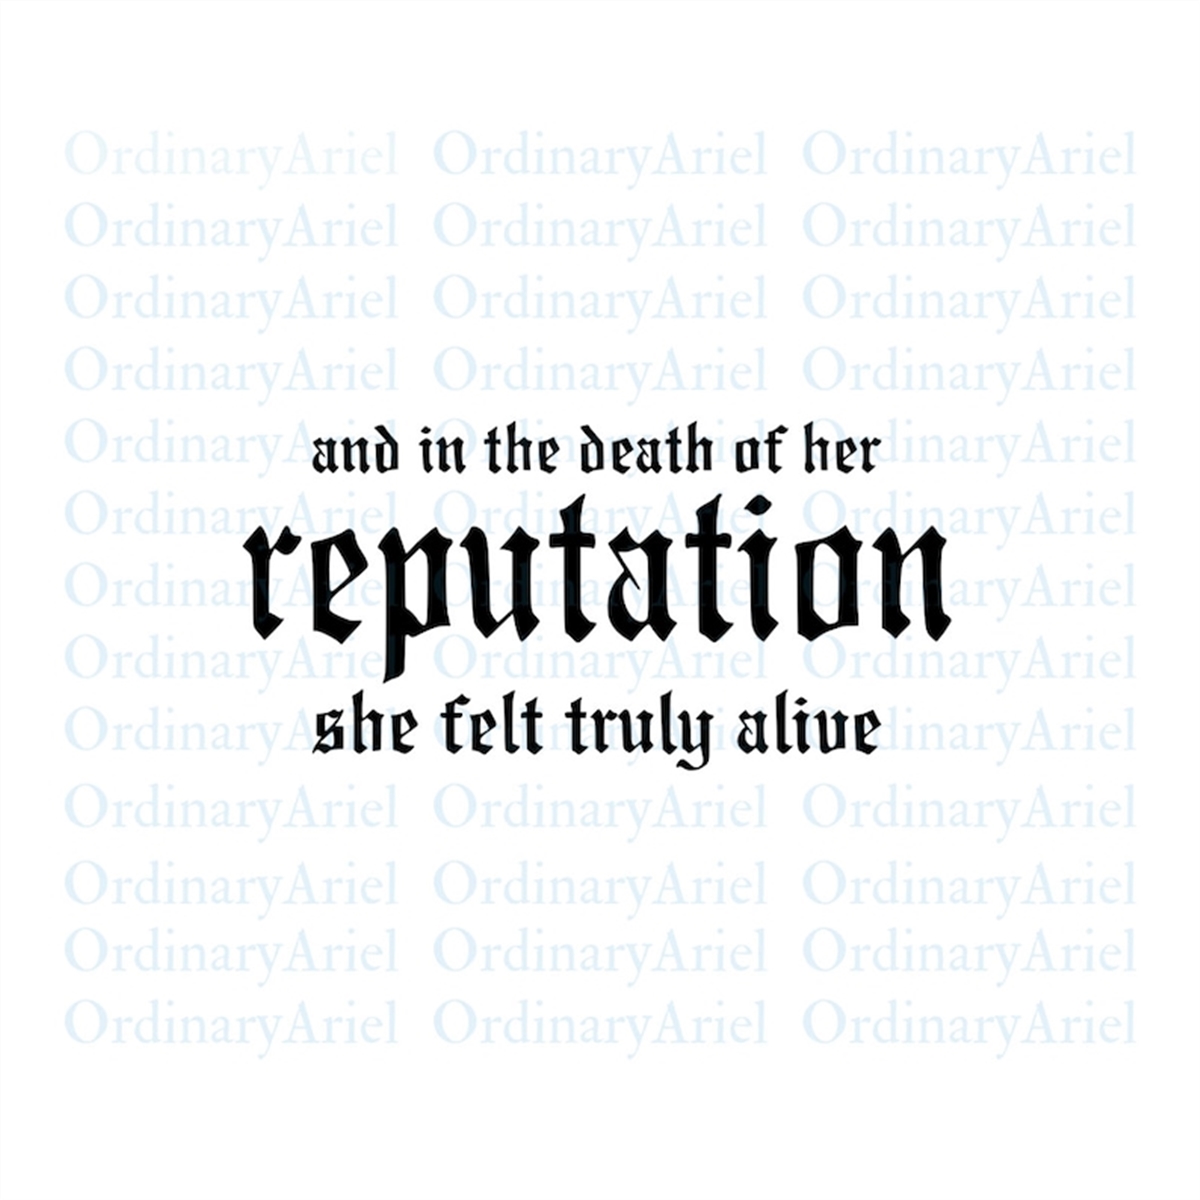 in-the-death-of-her-reputation-taylor-swift-svg-png-jpeg-files-image-1